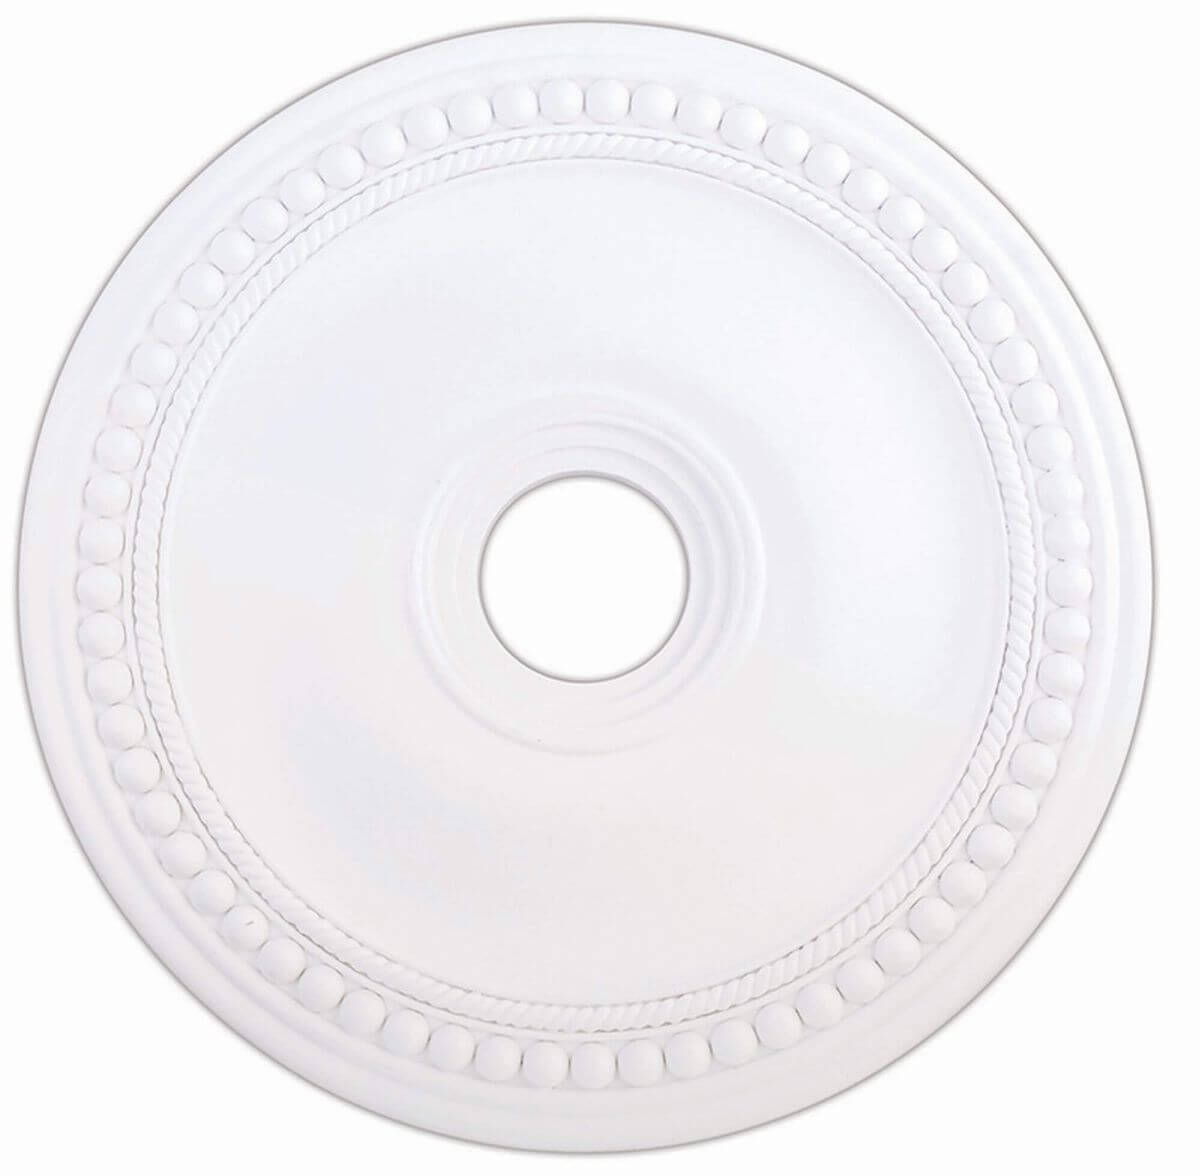 24 X 2 inch Ceiling Medallion In White - 102739